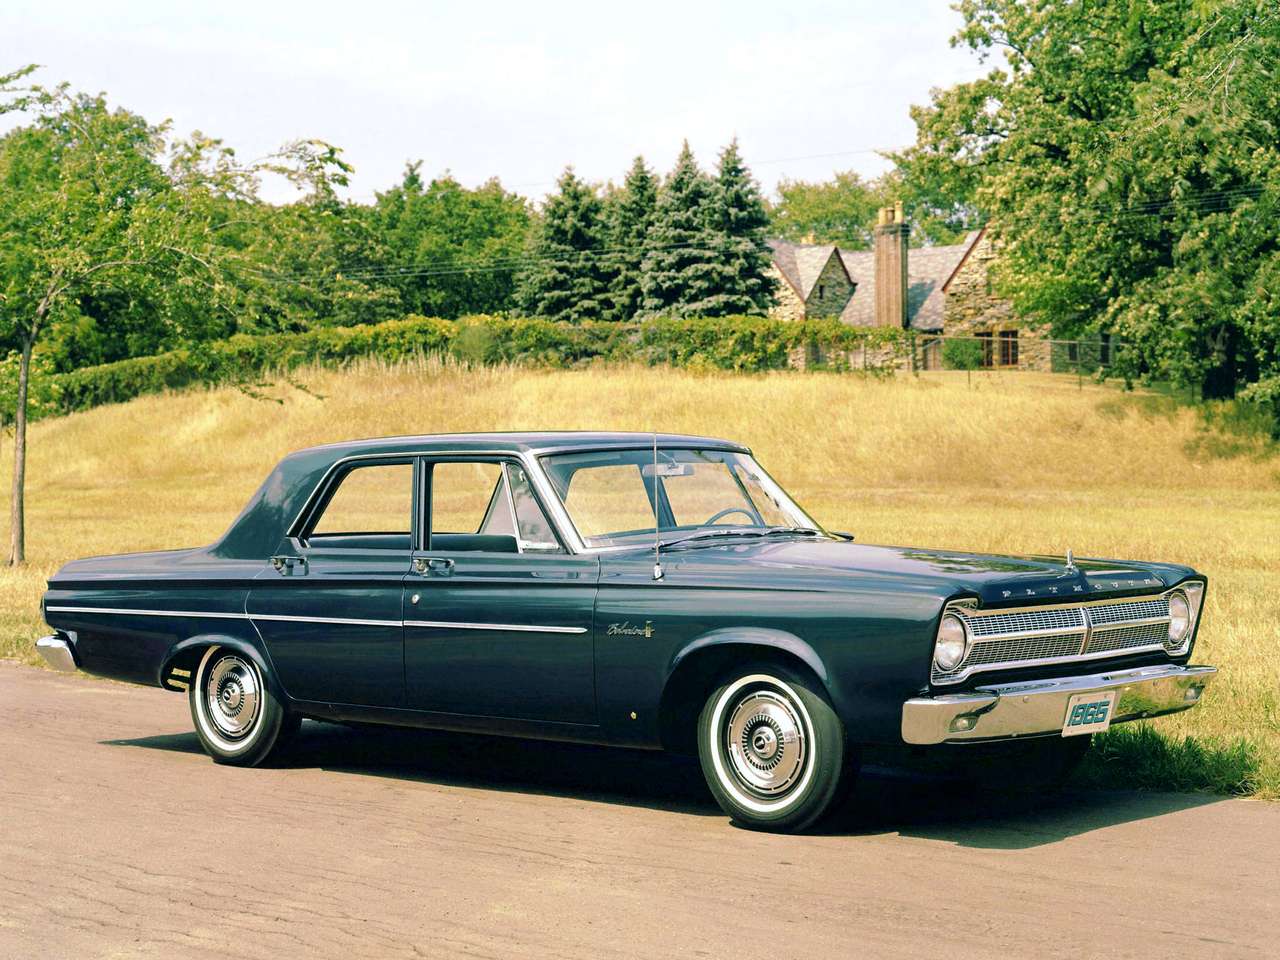 1965 Plymouth Belvedere Berlina puzzle online